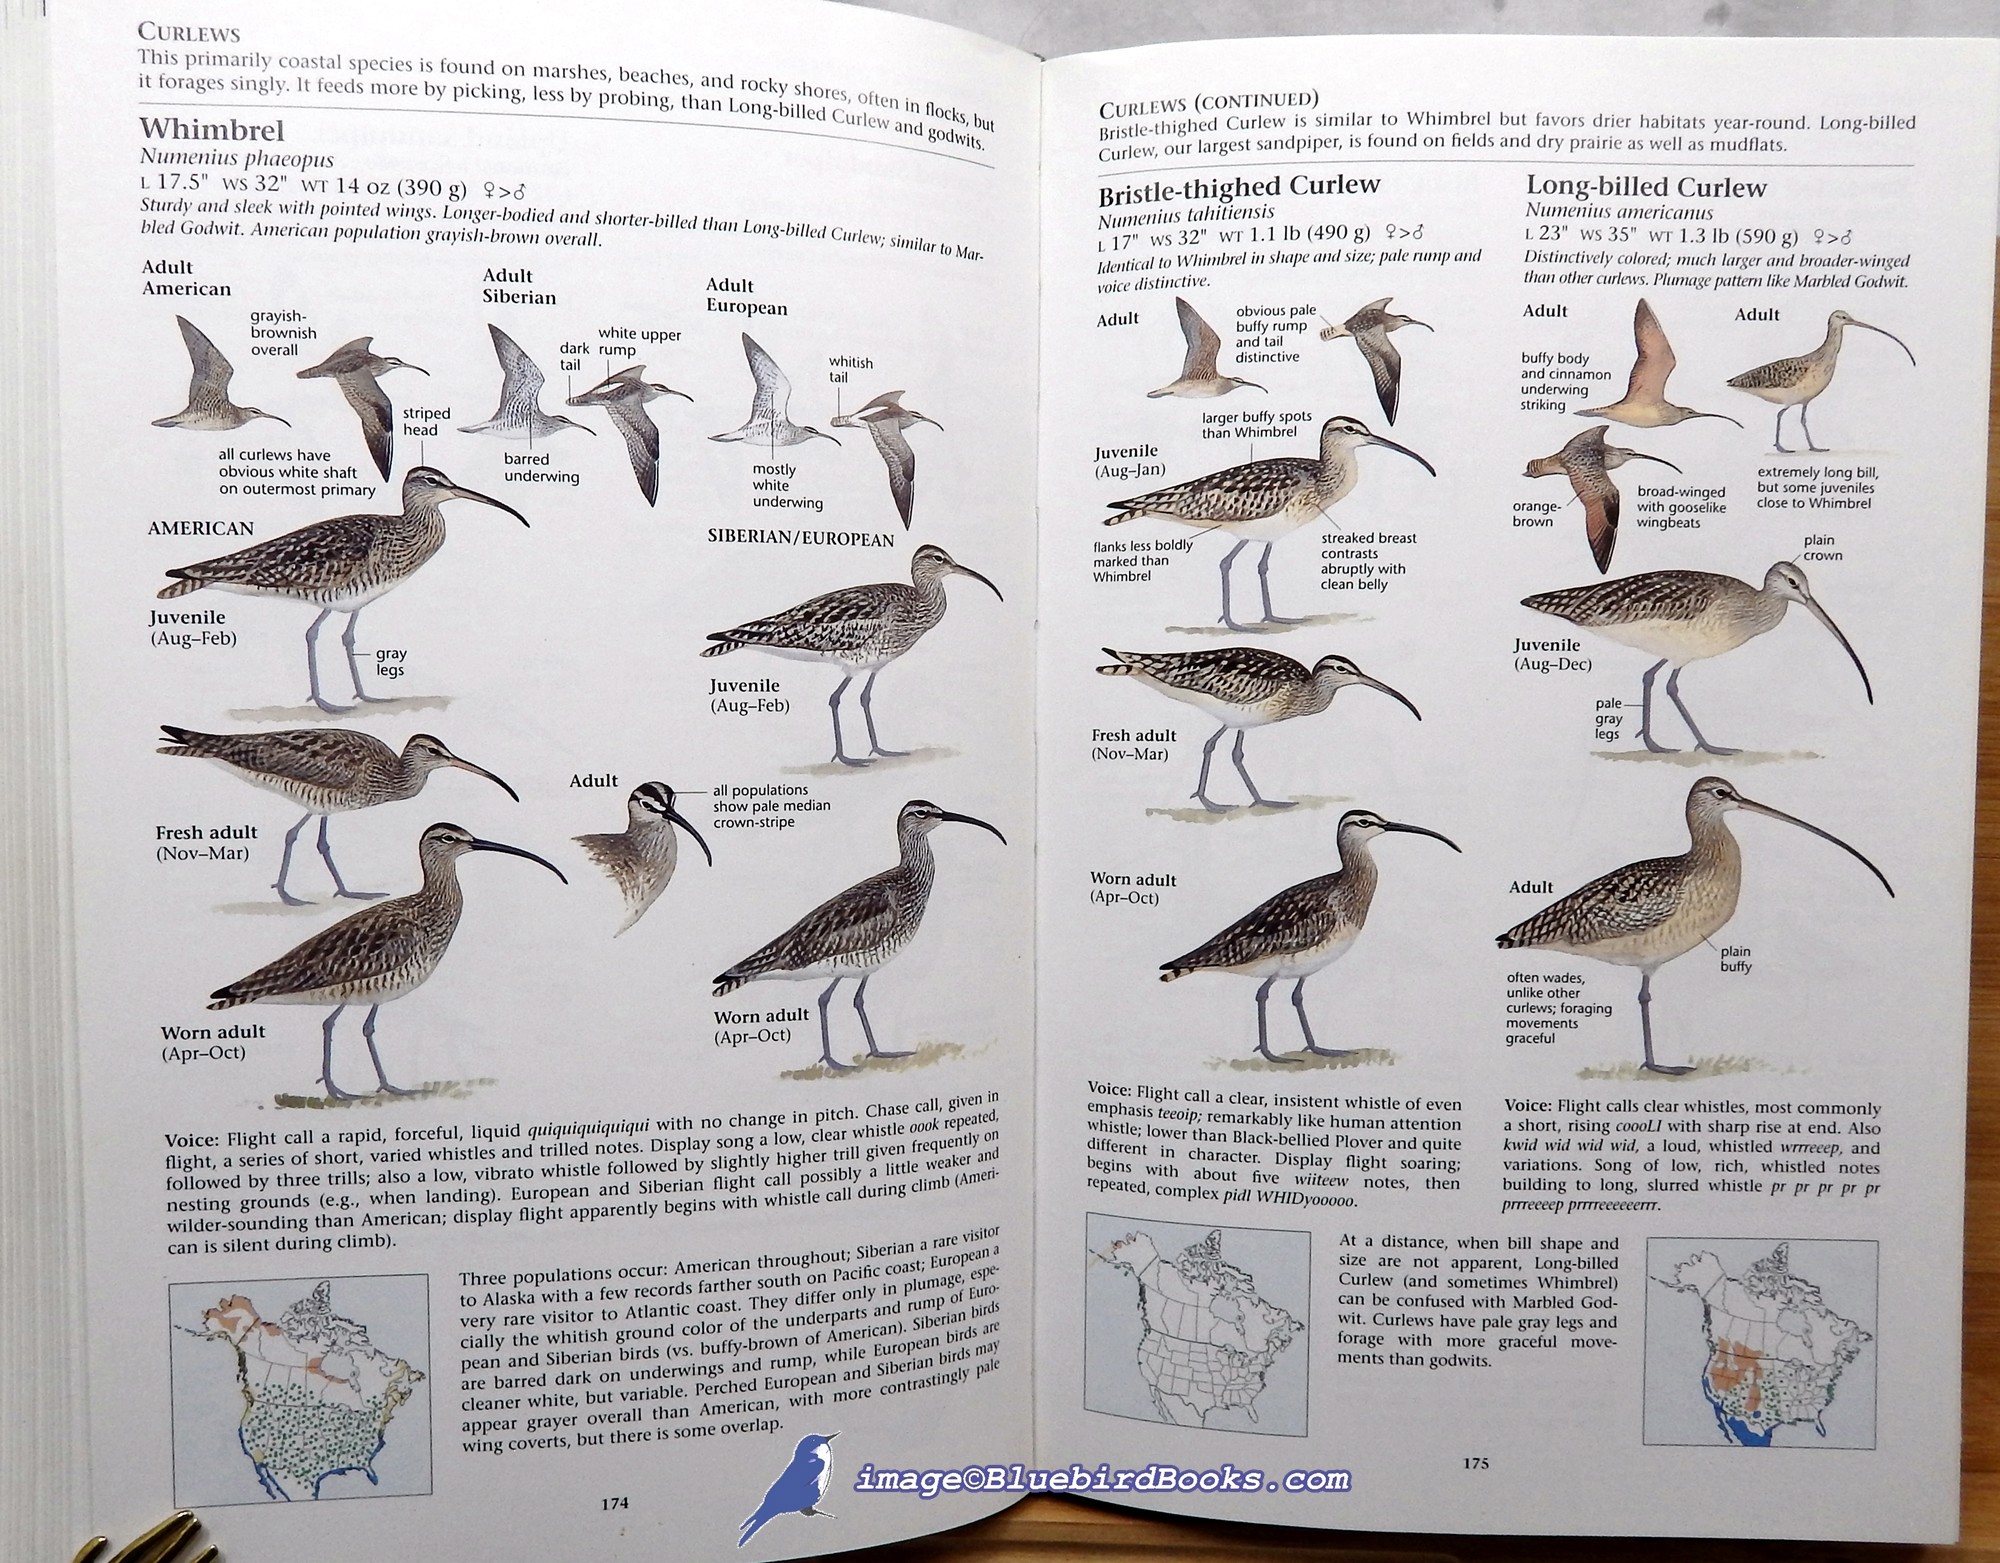 SIBLEY, DAVID ALLEN (AUTHOR AND ILLUSTRATOR) - The Sibley Guide to Birds (National Audubon Society)